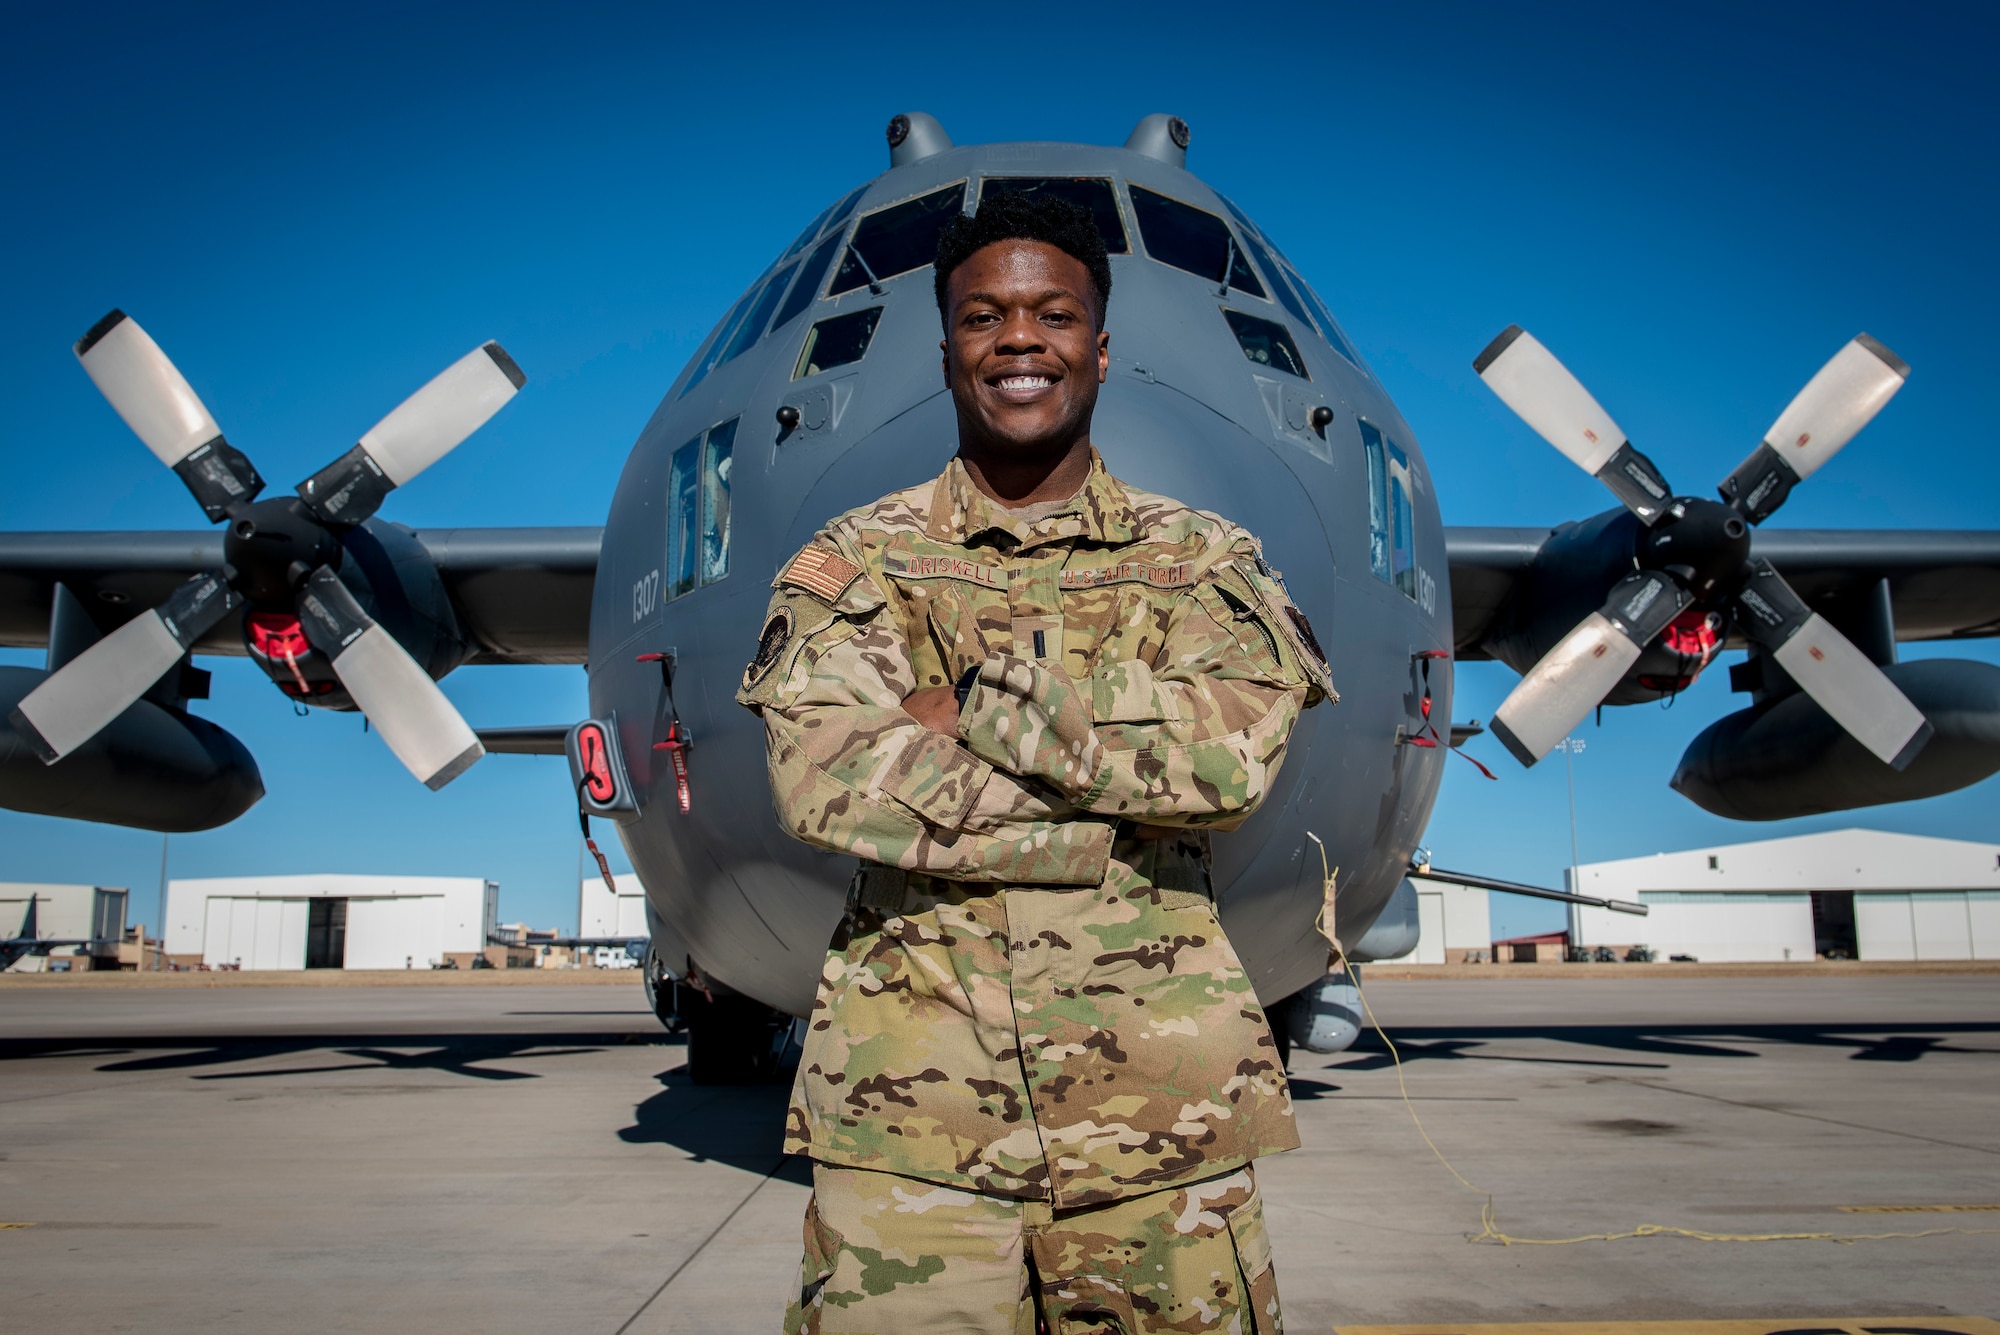 1st Lt. Bryan Driskell, an AC-130W Stinger II aircraft pilot with the 16th Special Operations Squadron, stands in front of his assigned aircraft at Cannon Air Force Base, N.M., Jan. 27, 2021. Driskell had decided to become a pilot after taking a flying class during his sophomore year at the Air Force Academy. (U.S. Air Force photo by Senior Airman Vernon R. Walter III)